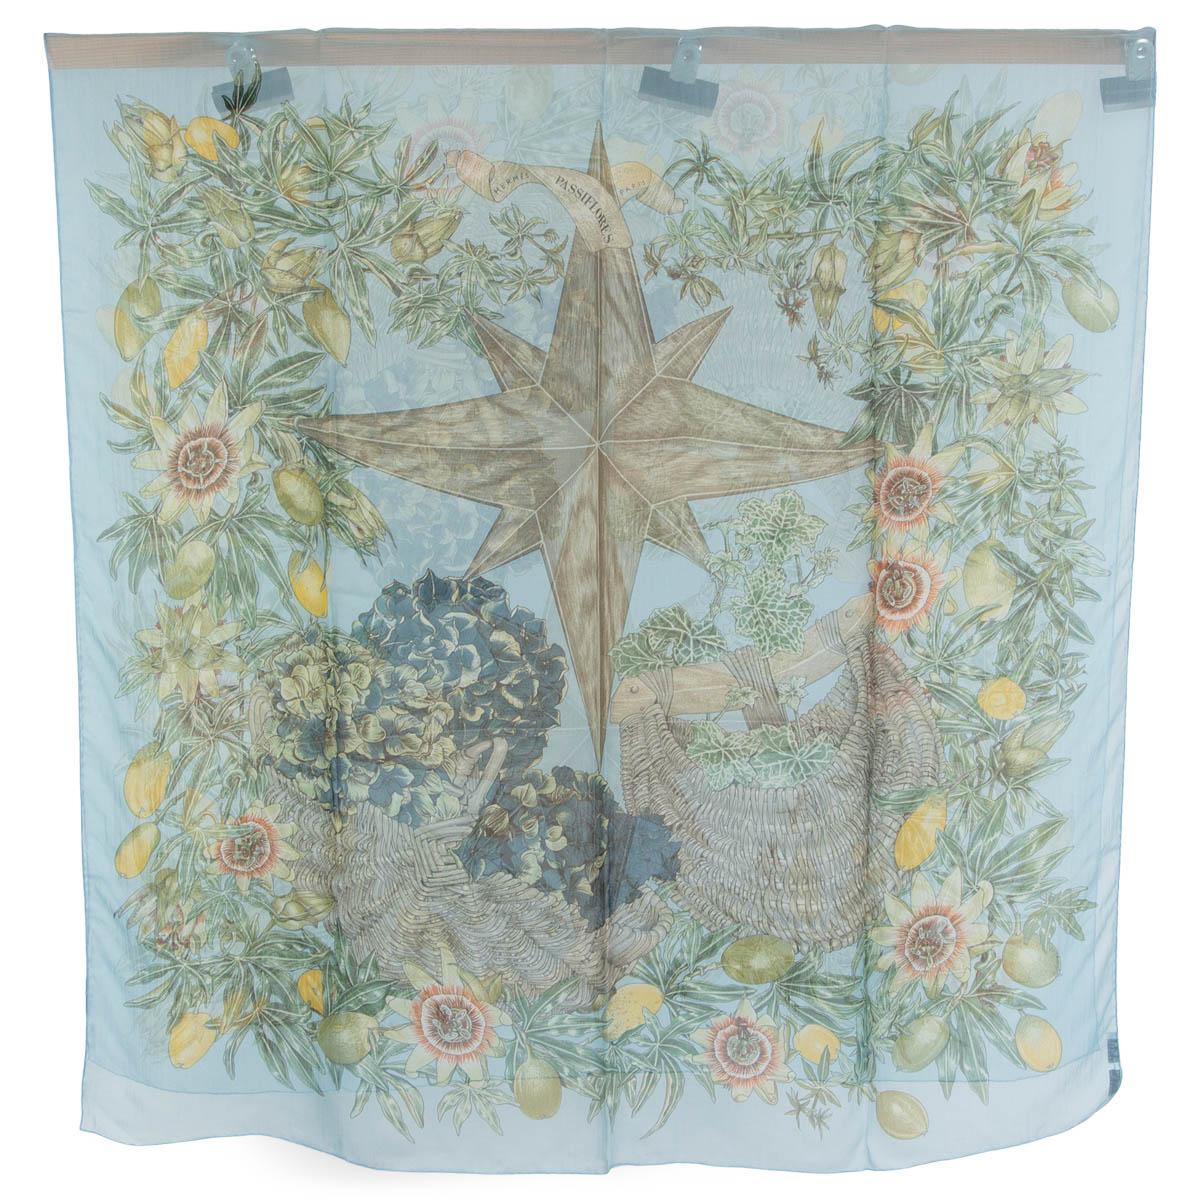 100% authentic Hermès Passiflores oblong mousseline shawl in light blue silk chiffon (100%) an elaborate design of florals and fruits on a background of light blue with details in taupe, green, navy blue, yellow and orange. Has been worn and is in